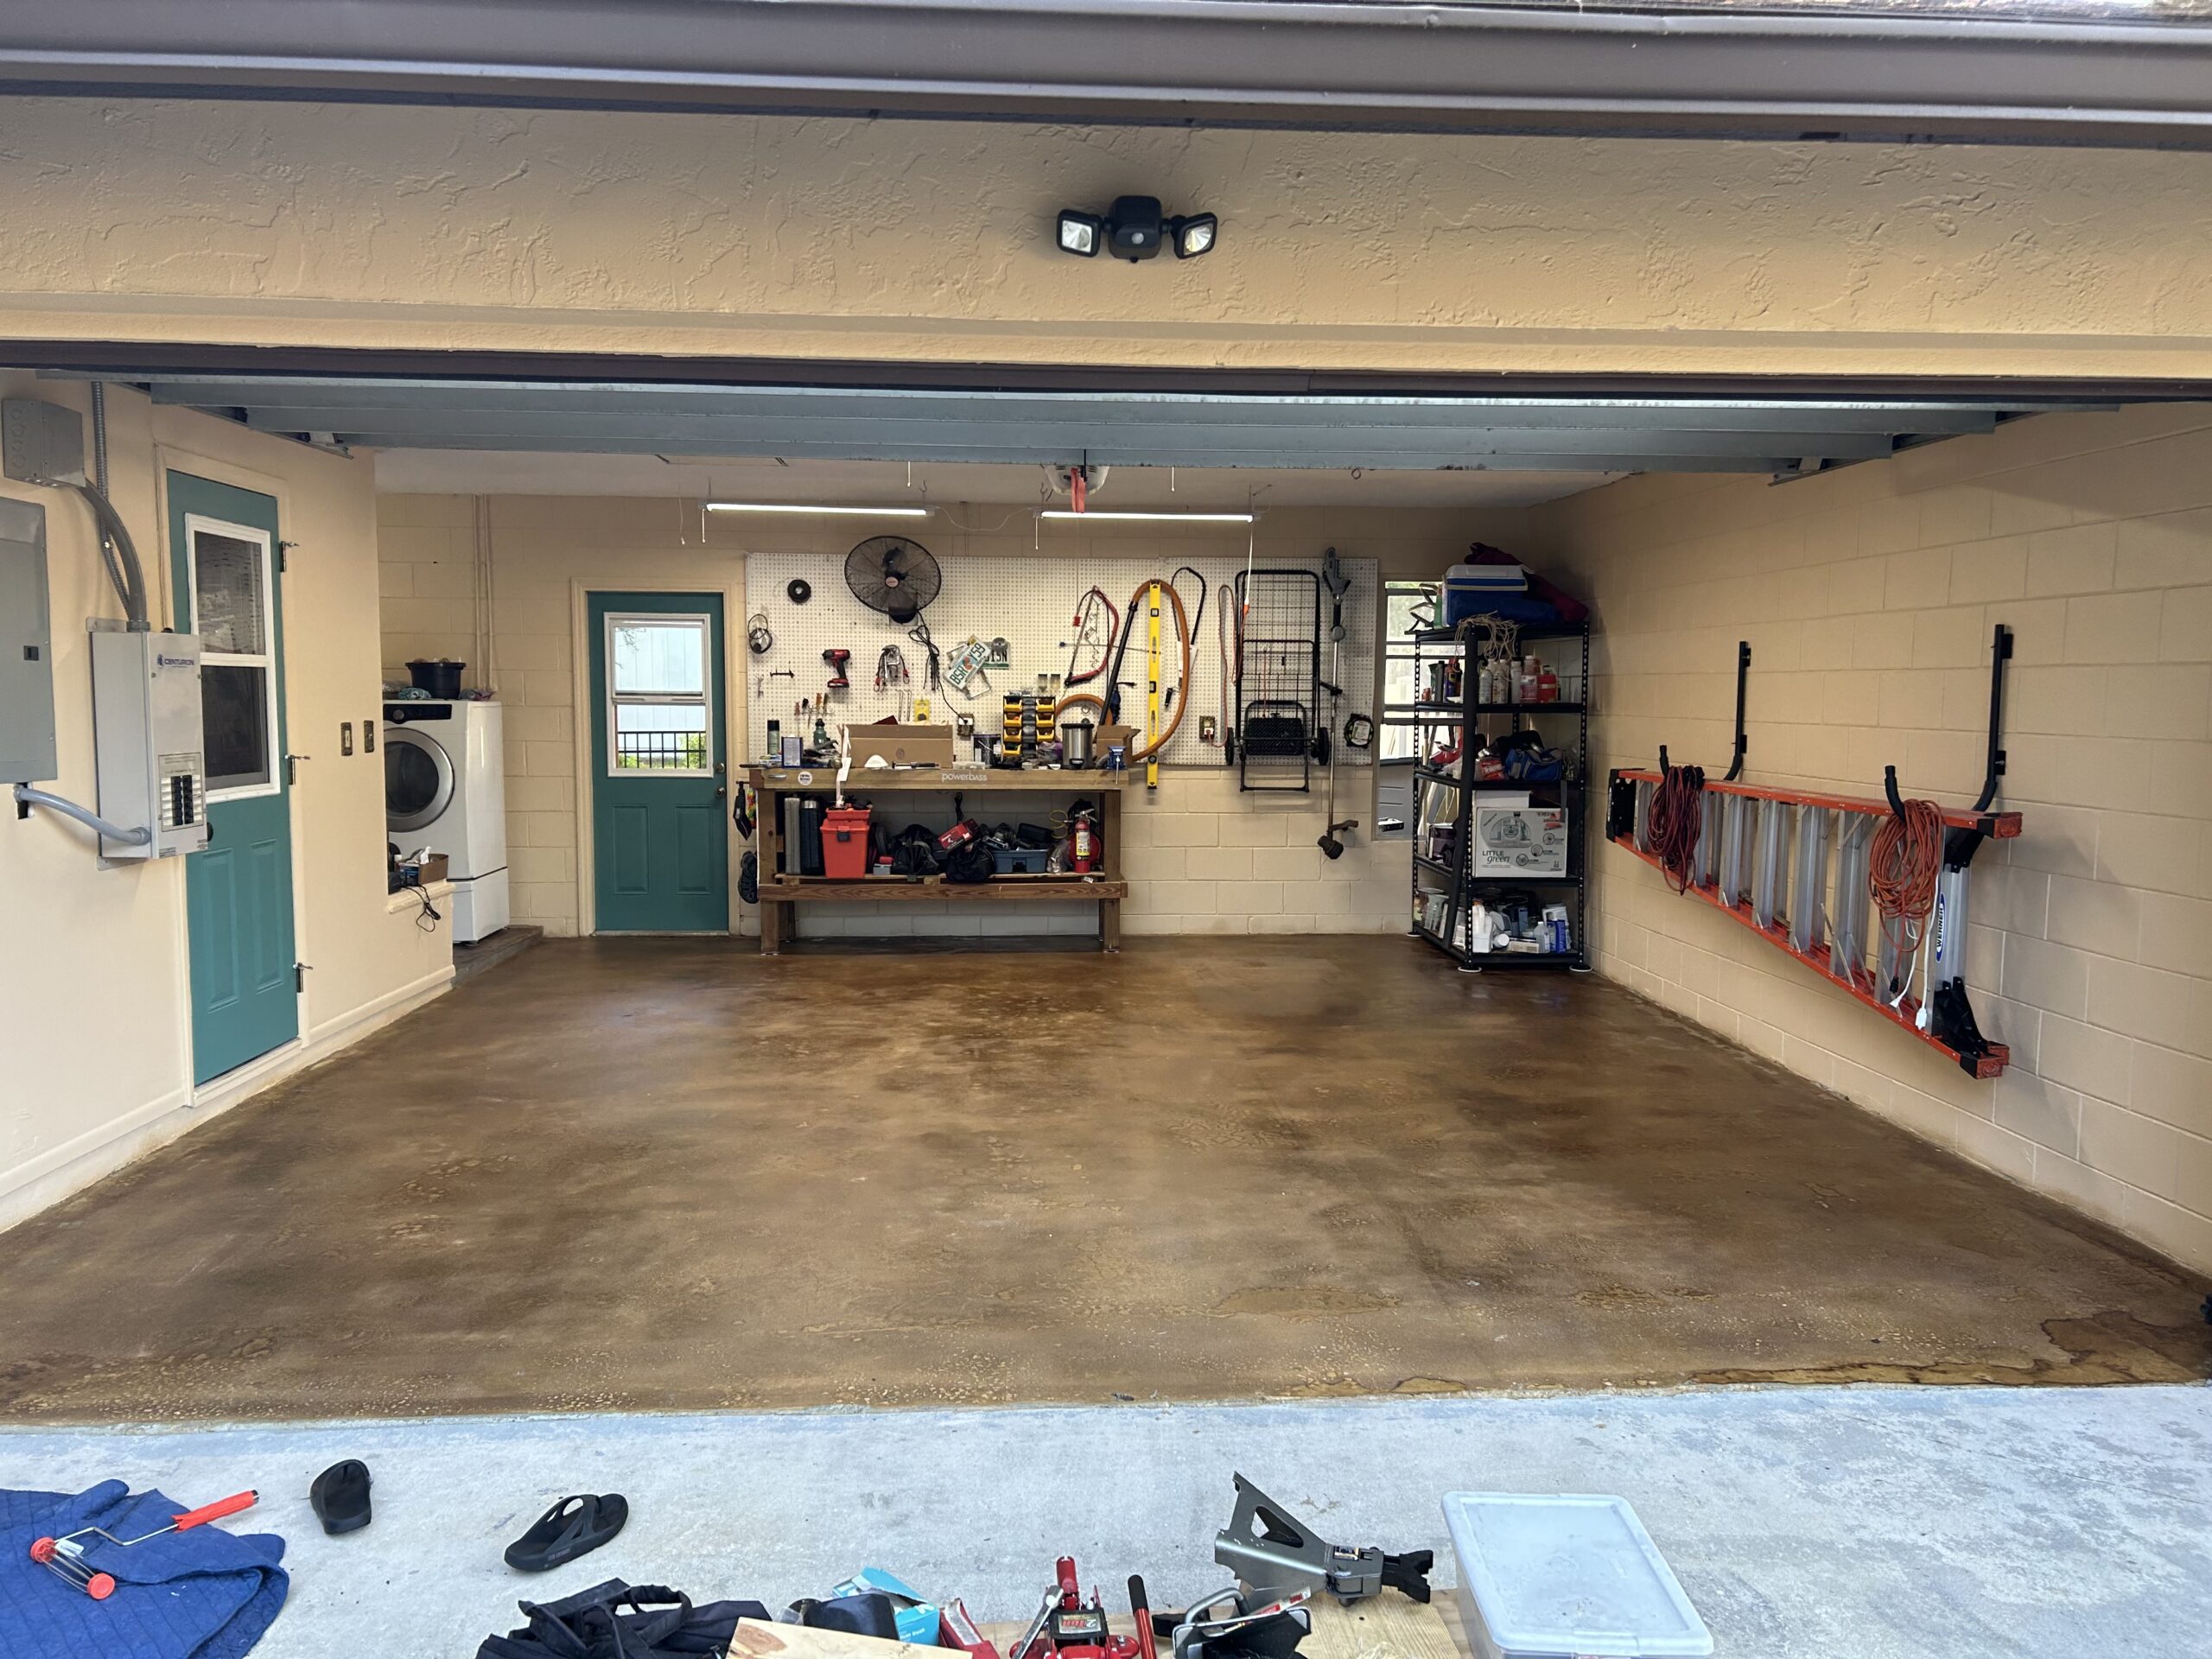 The newly sealed garage floor with an open door for ventilation due to strong VOCs, followed by the successful test of parking cars without peeling or hot tire marks after the coating has cured